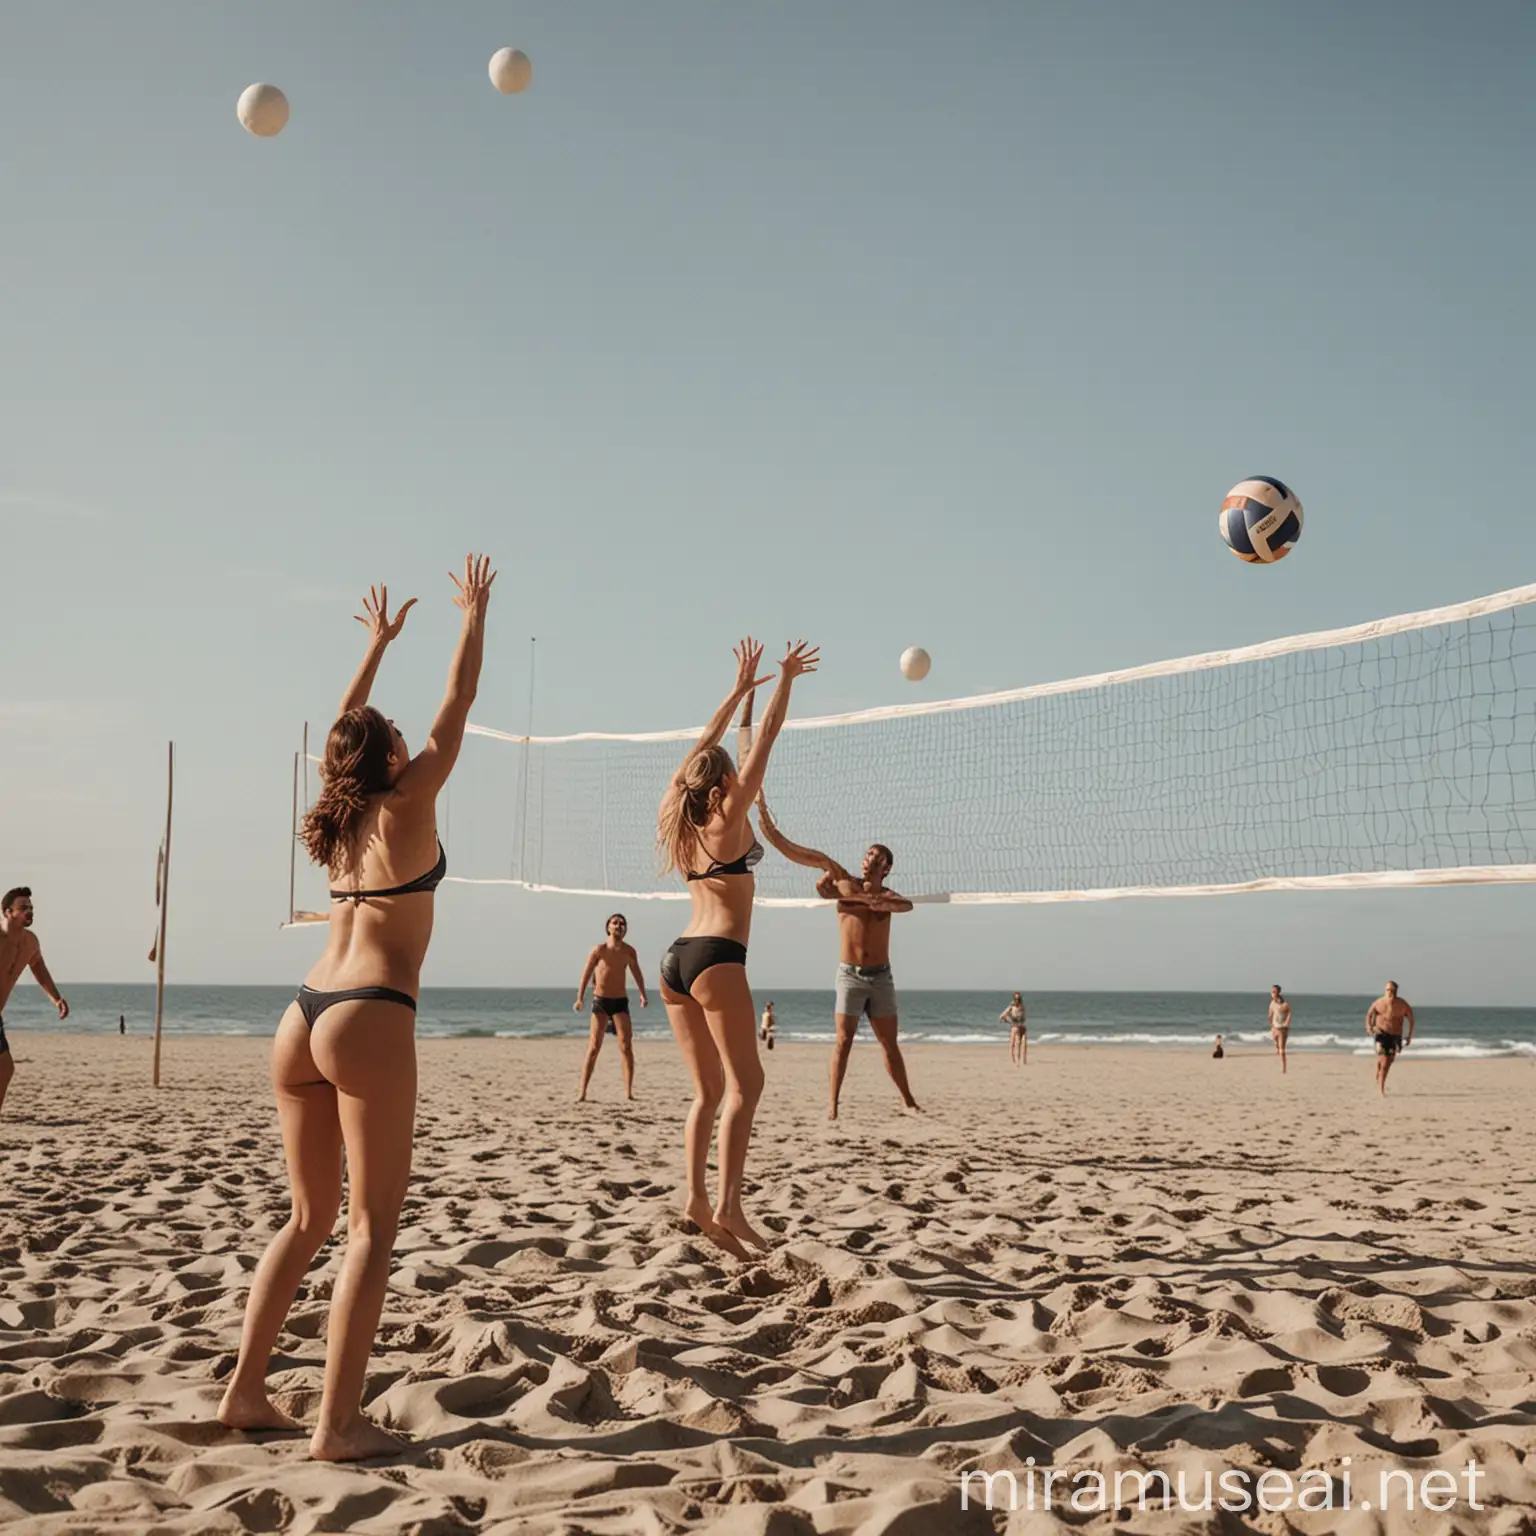 Beach Volleyball Game with Men and Women Players in Action